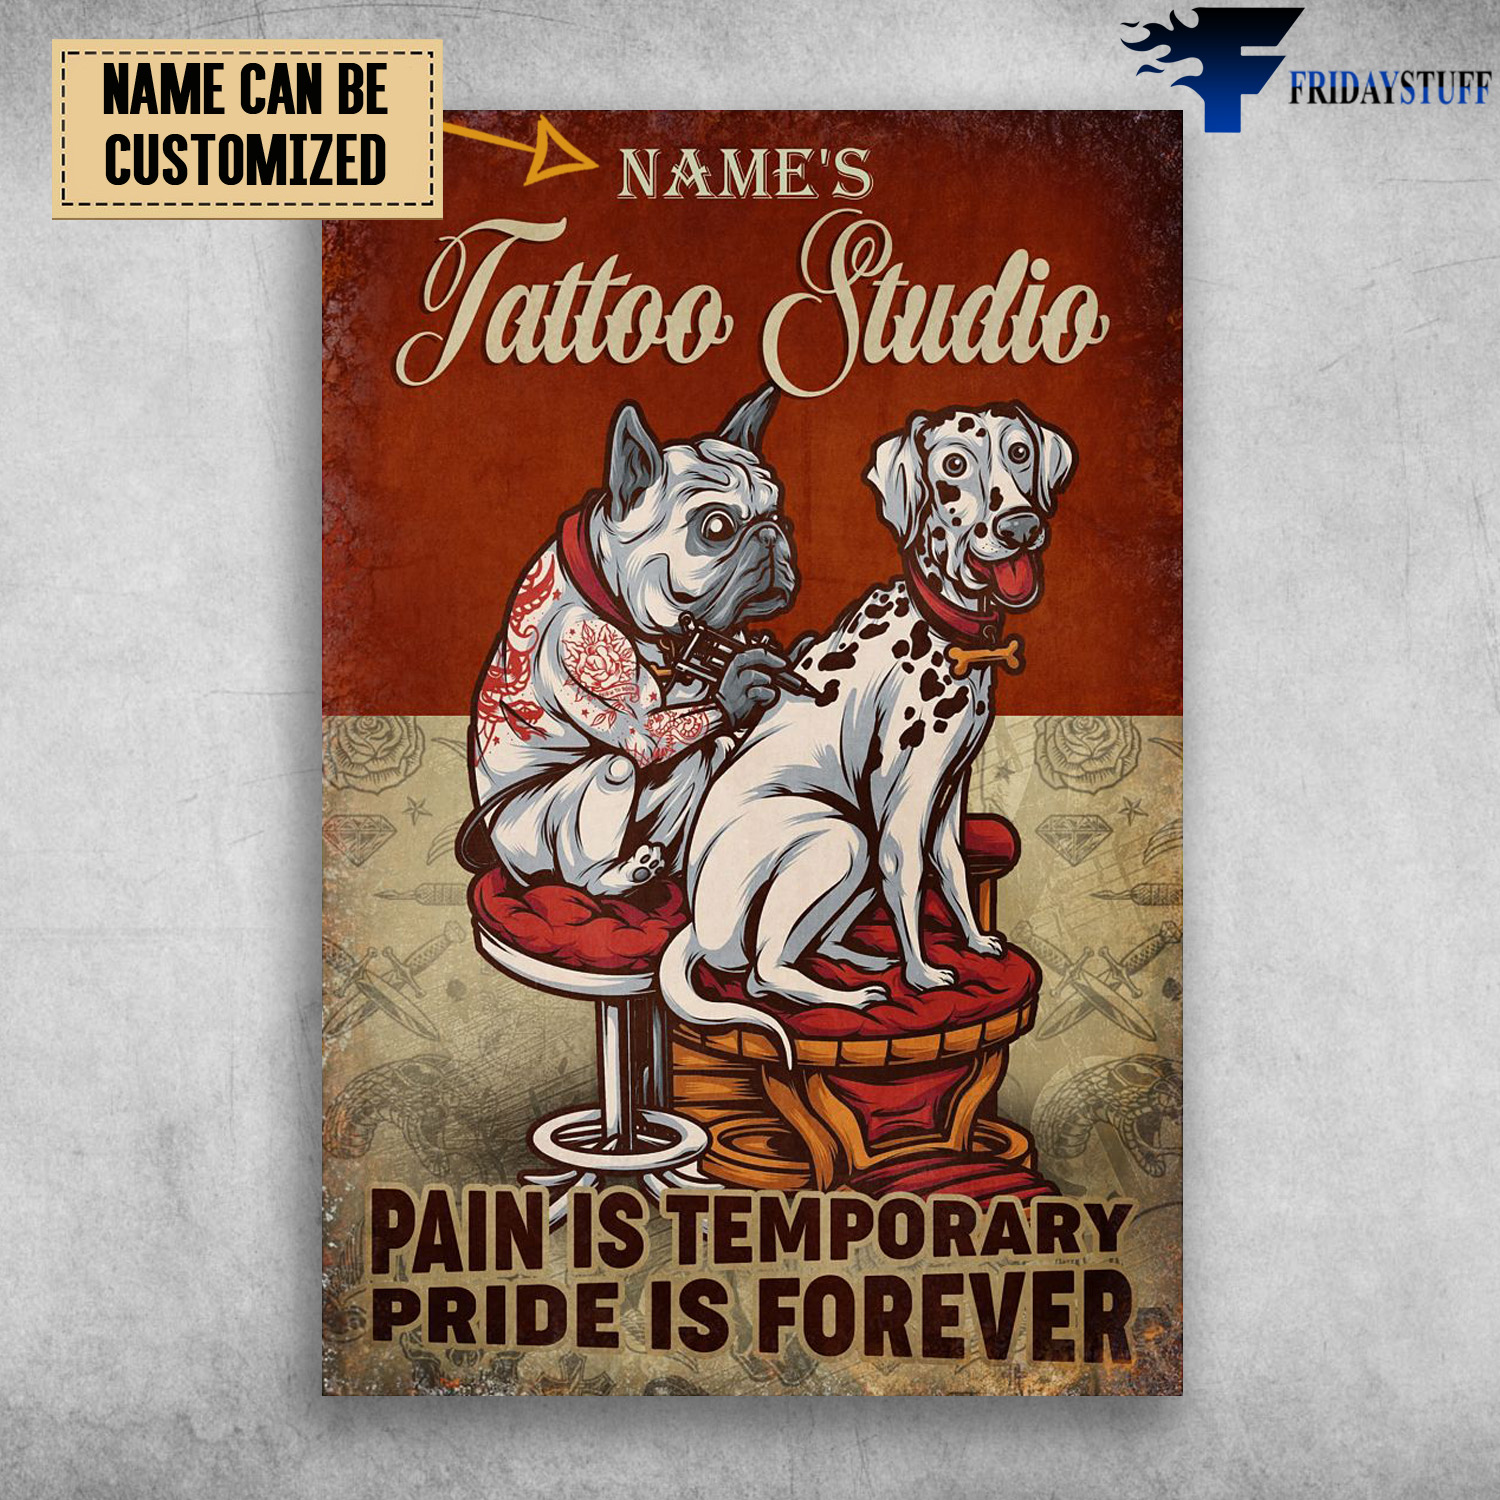 Tattoo Studio, Pain Is Temporary, Pride Is Forever